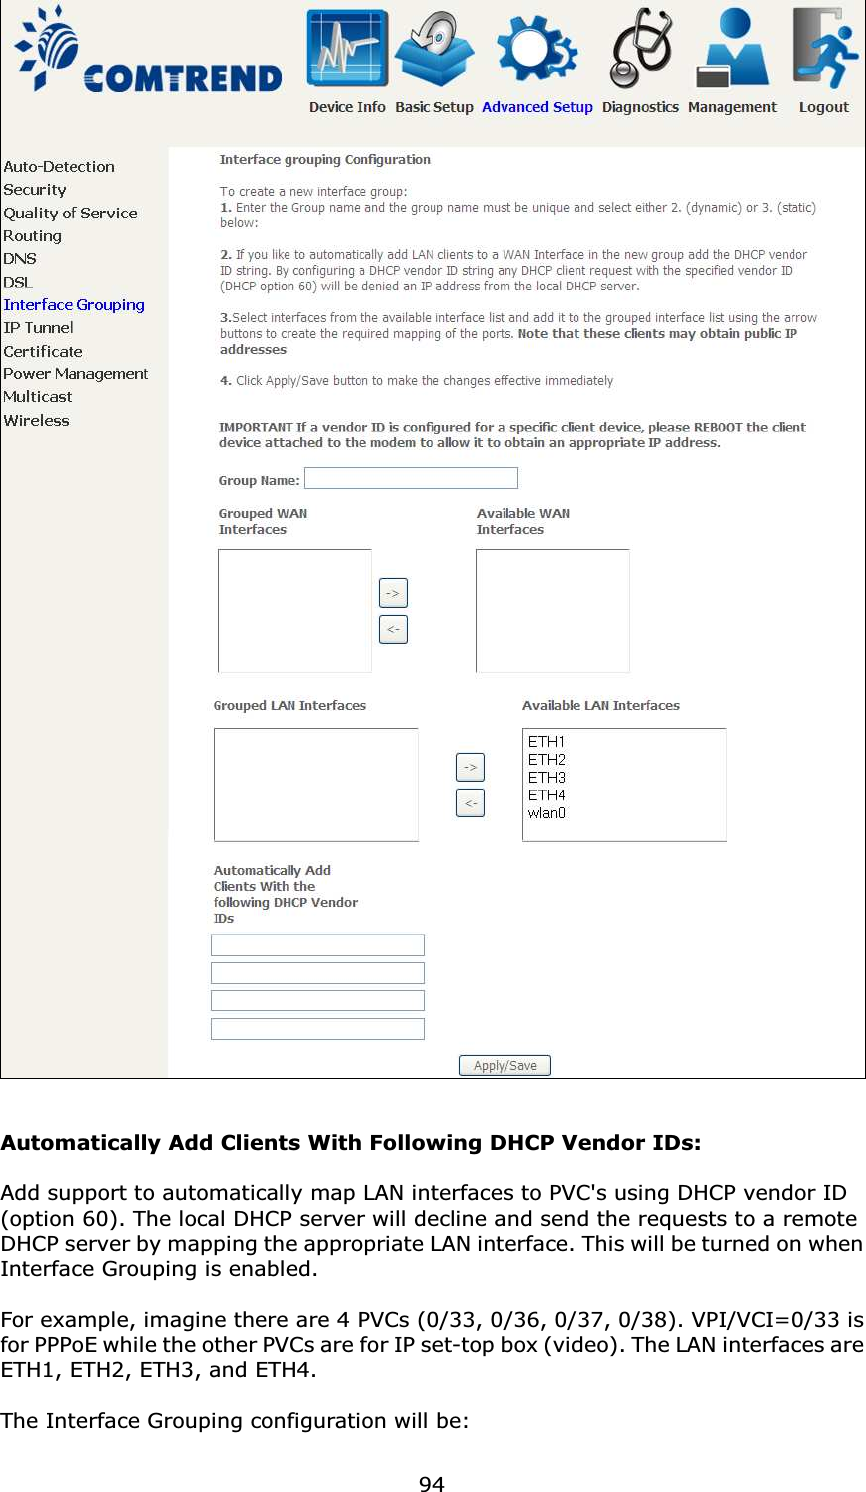  94   Automatically Add Clients With Following DHCP Vendor IDs:  Add support to automatically map LAN interfaces to PVC&apos;s using DHCP vendor ID (option 60). The local DHCP server will decline and send the requests to a remote DHCP server by mapping the appropriate LAN interface. This will be turned on when Interface Grouping is enabled.  For example, imagine there are 4 PVCs (0/33, 0/36, 0/37, 0/38). VPI/VCI=0/33 is for PPPoE while the other PVCs are for IP set-top box (video). The LAN interfaces are ETH1, ETH2, ETH3, and ETH4.  The Interface Grouping configuration will be: 